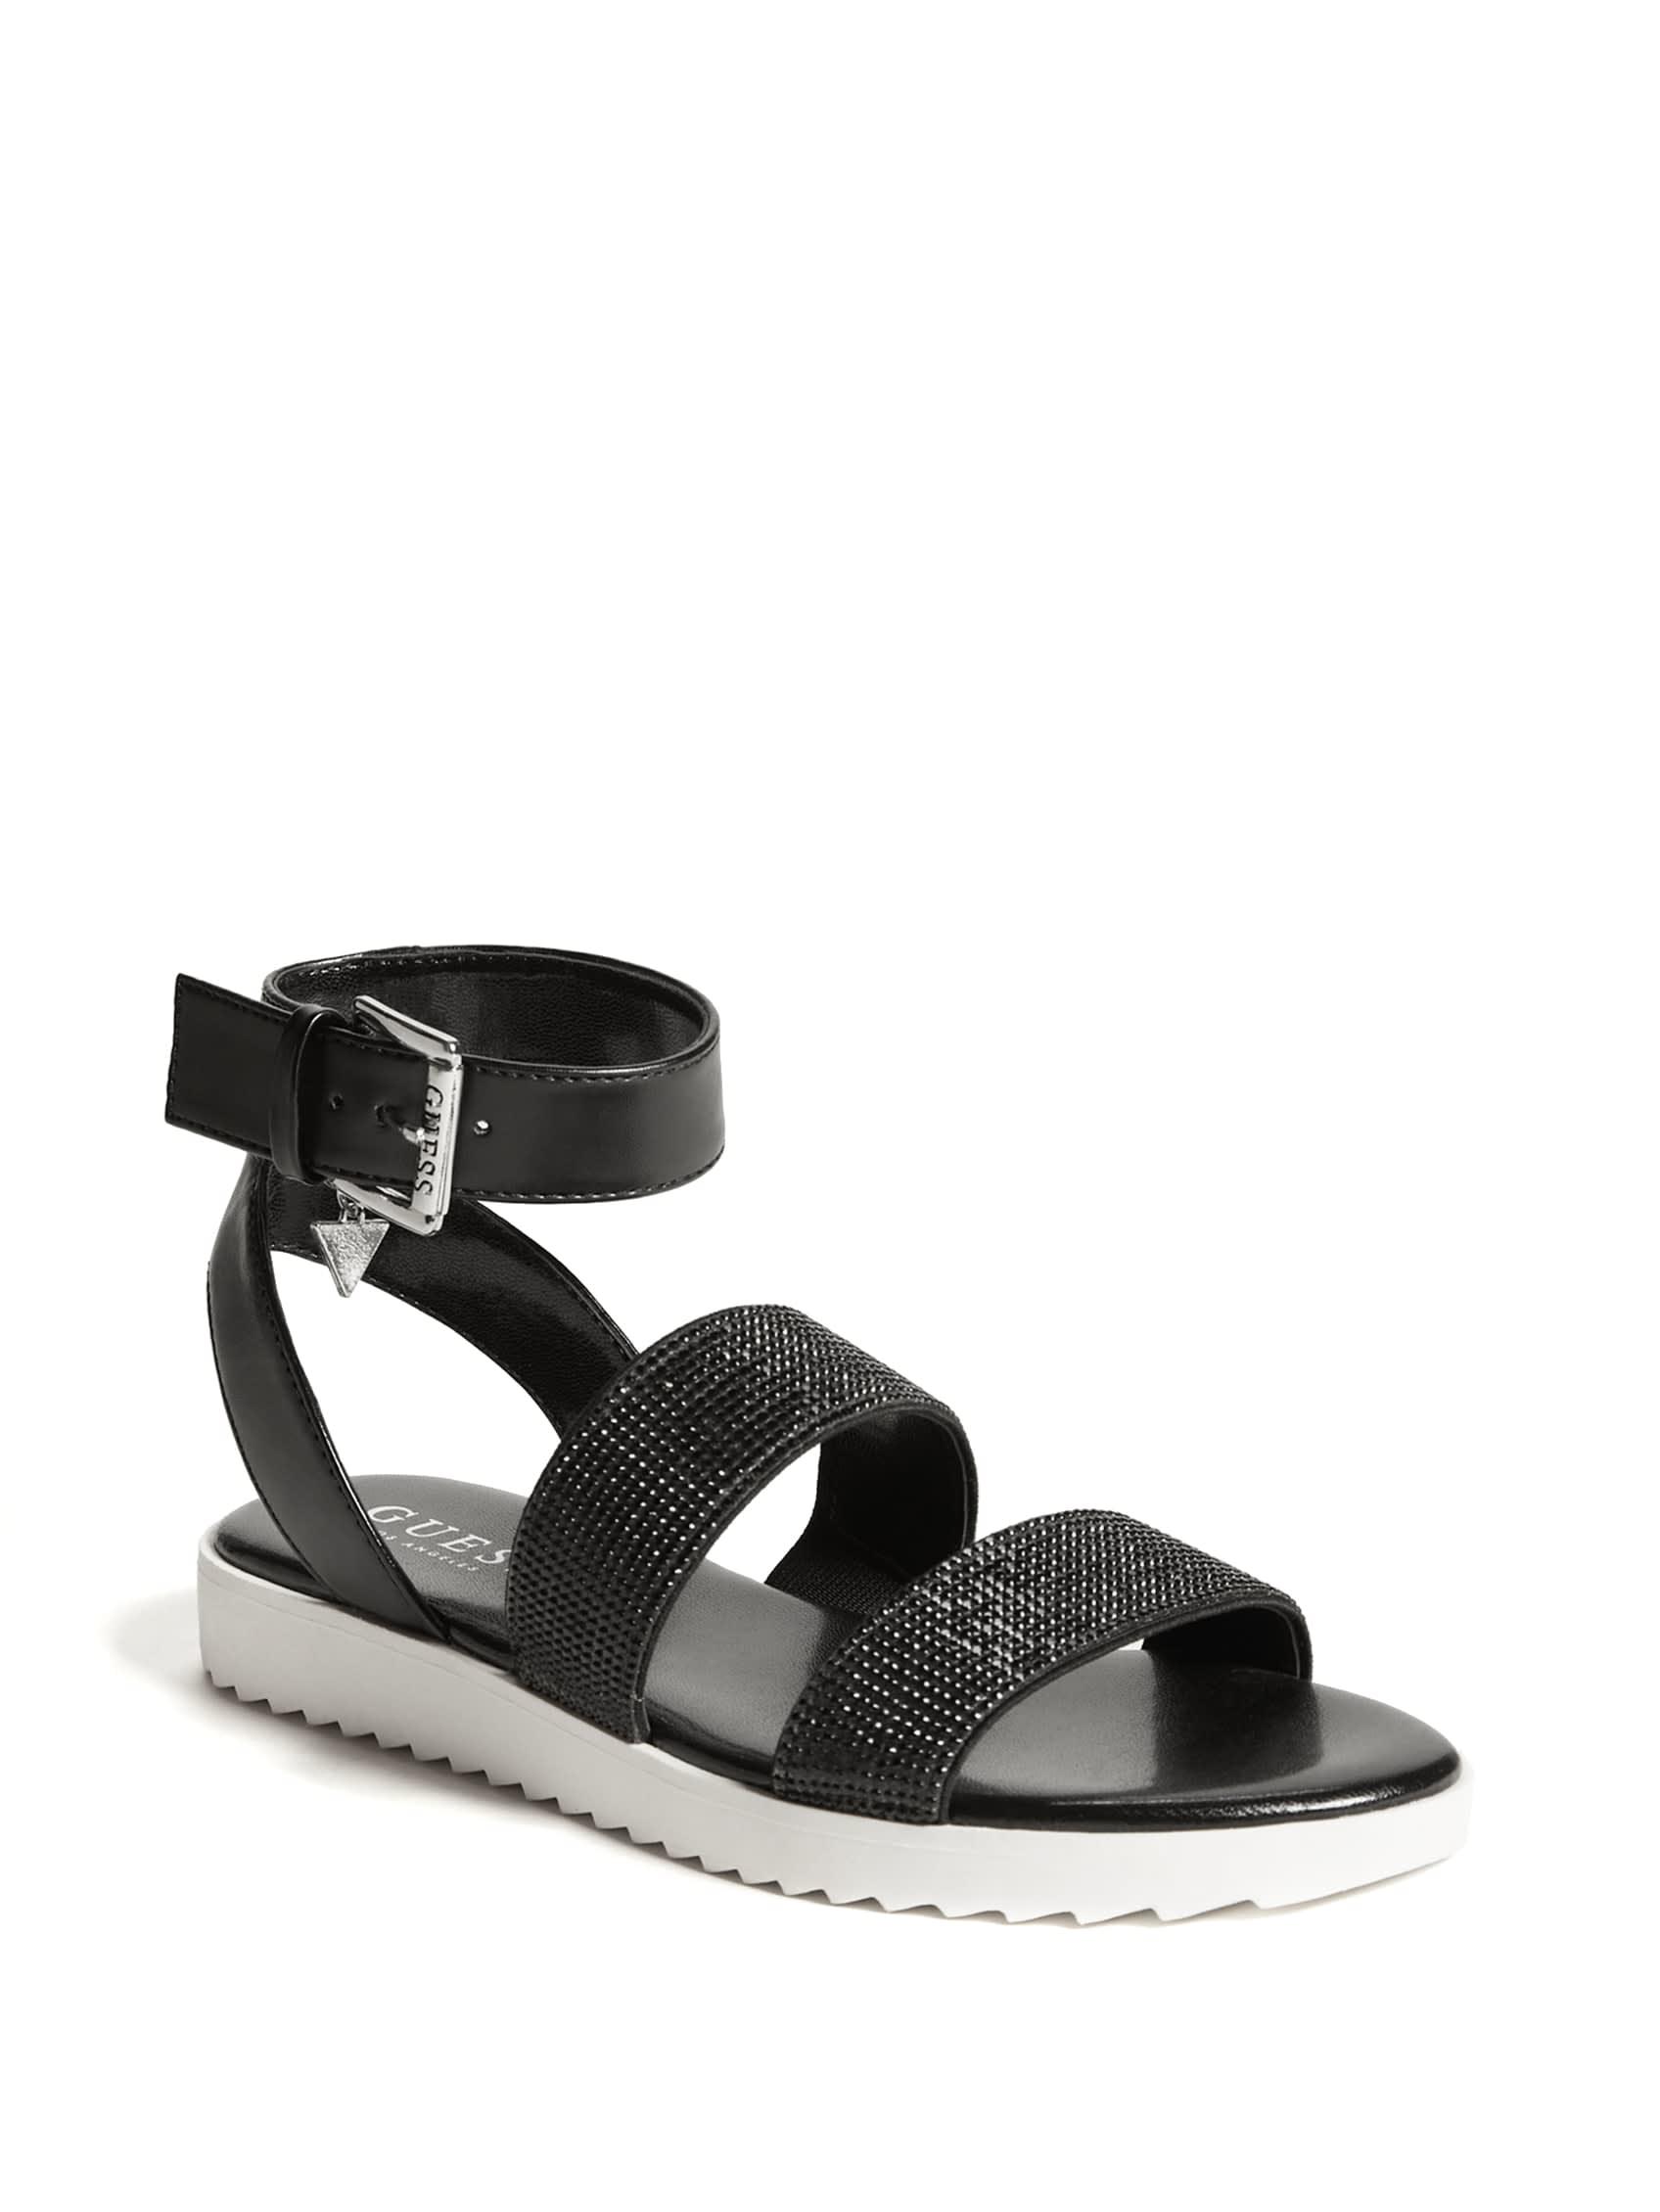 Guess Factory Kinley Sandals in Black | Lyst